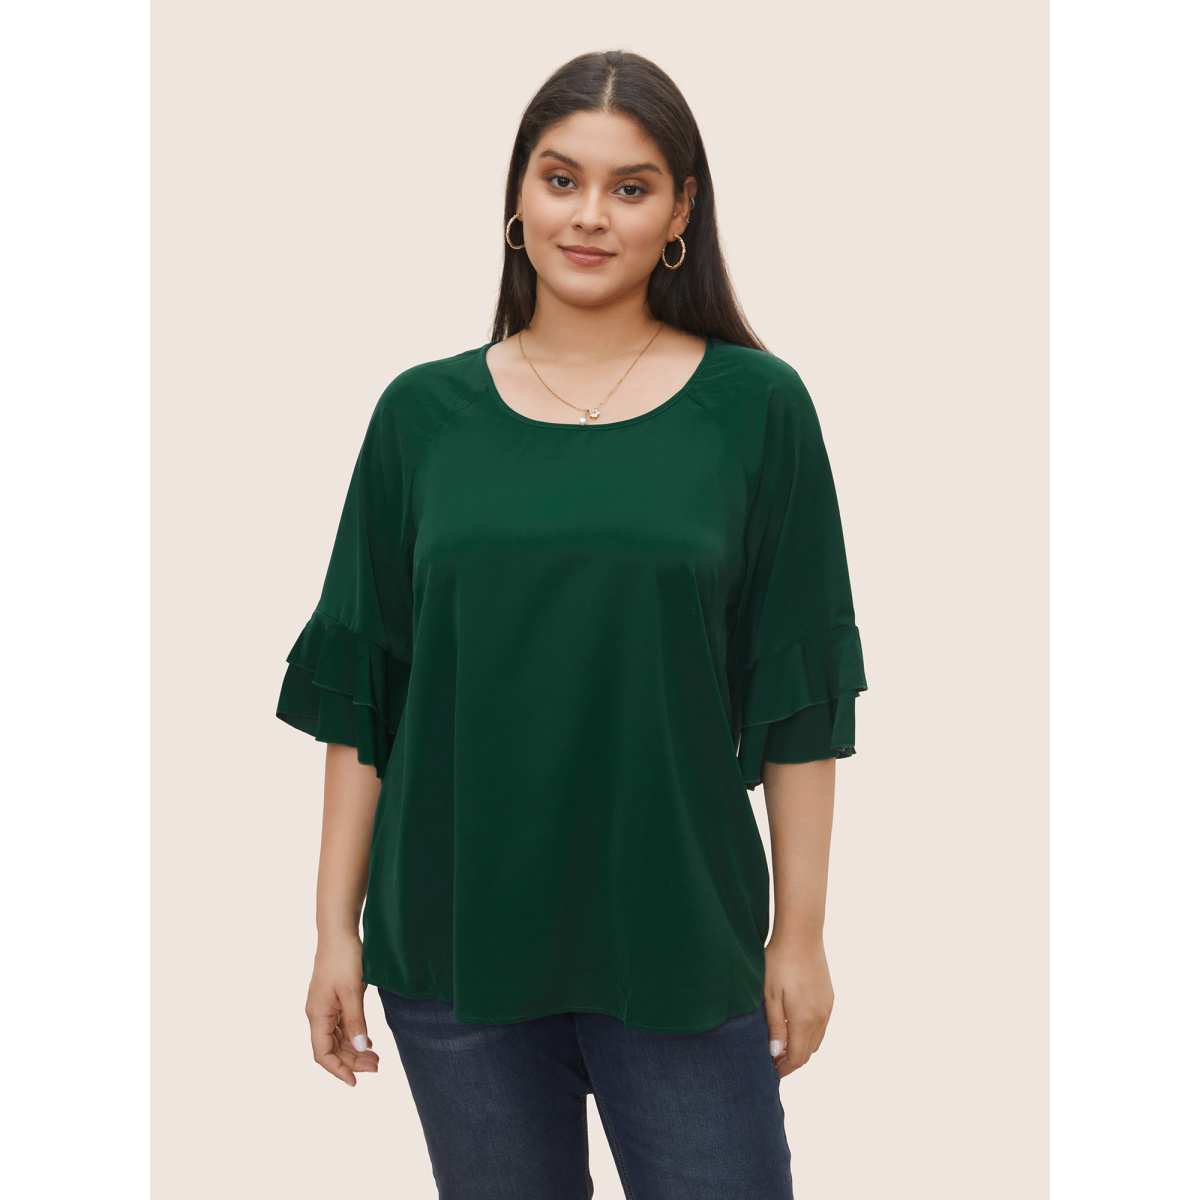 

Plus Size DarkGreen Plain Ruffle Tiered Round Neck Blouse Women Work From Home Elbow-length sleeve Round Neck Work Blouses BloomChic